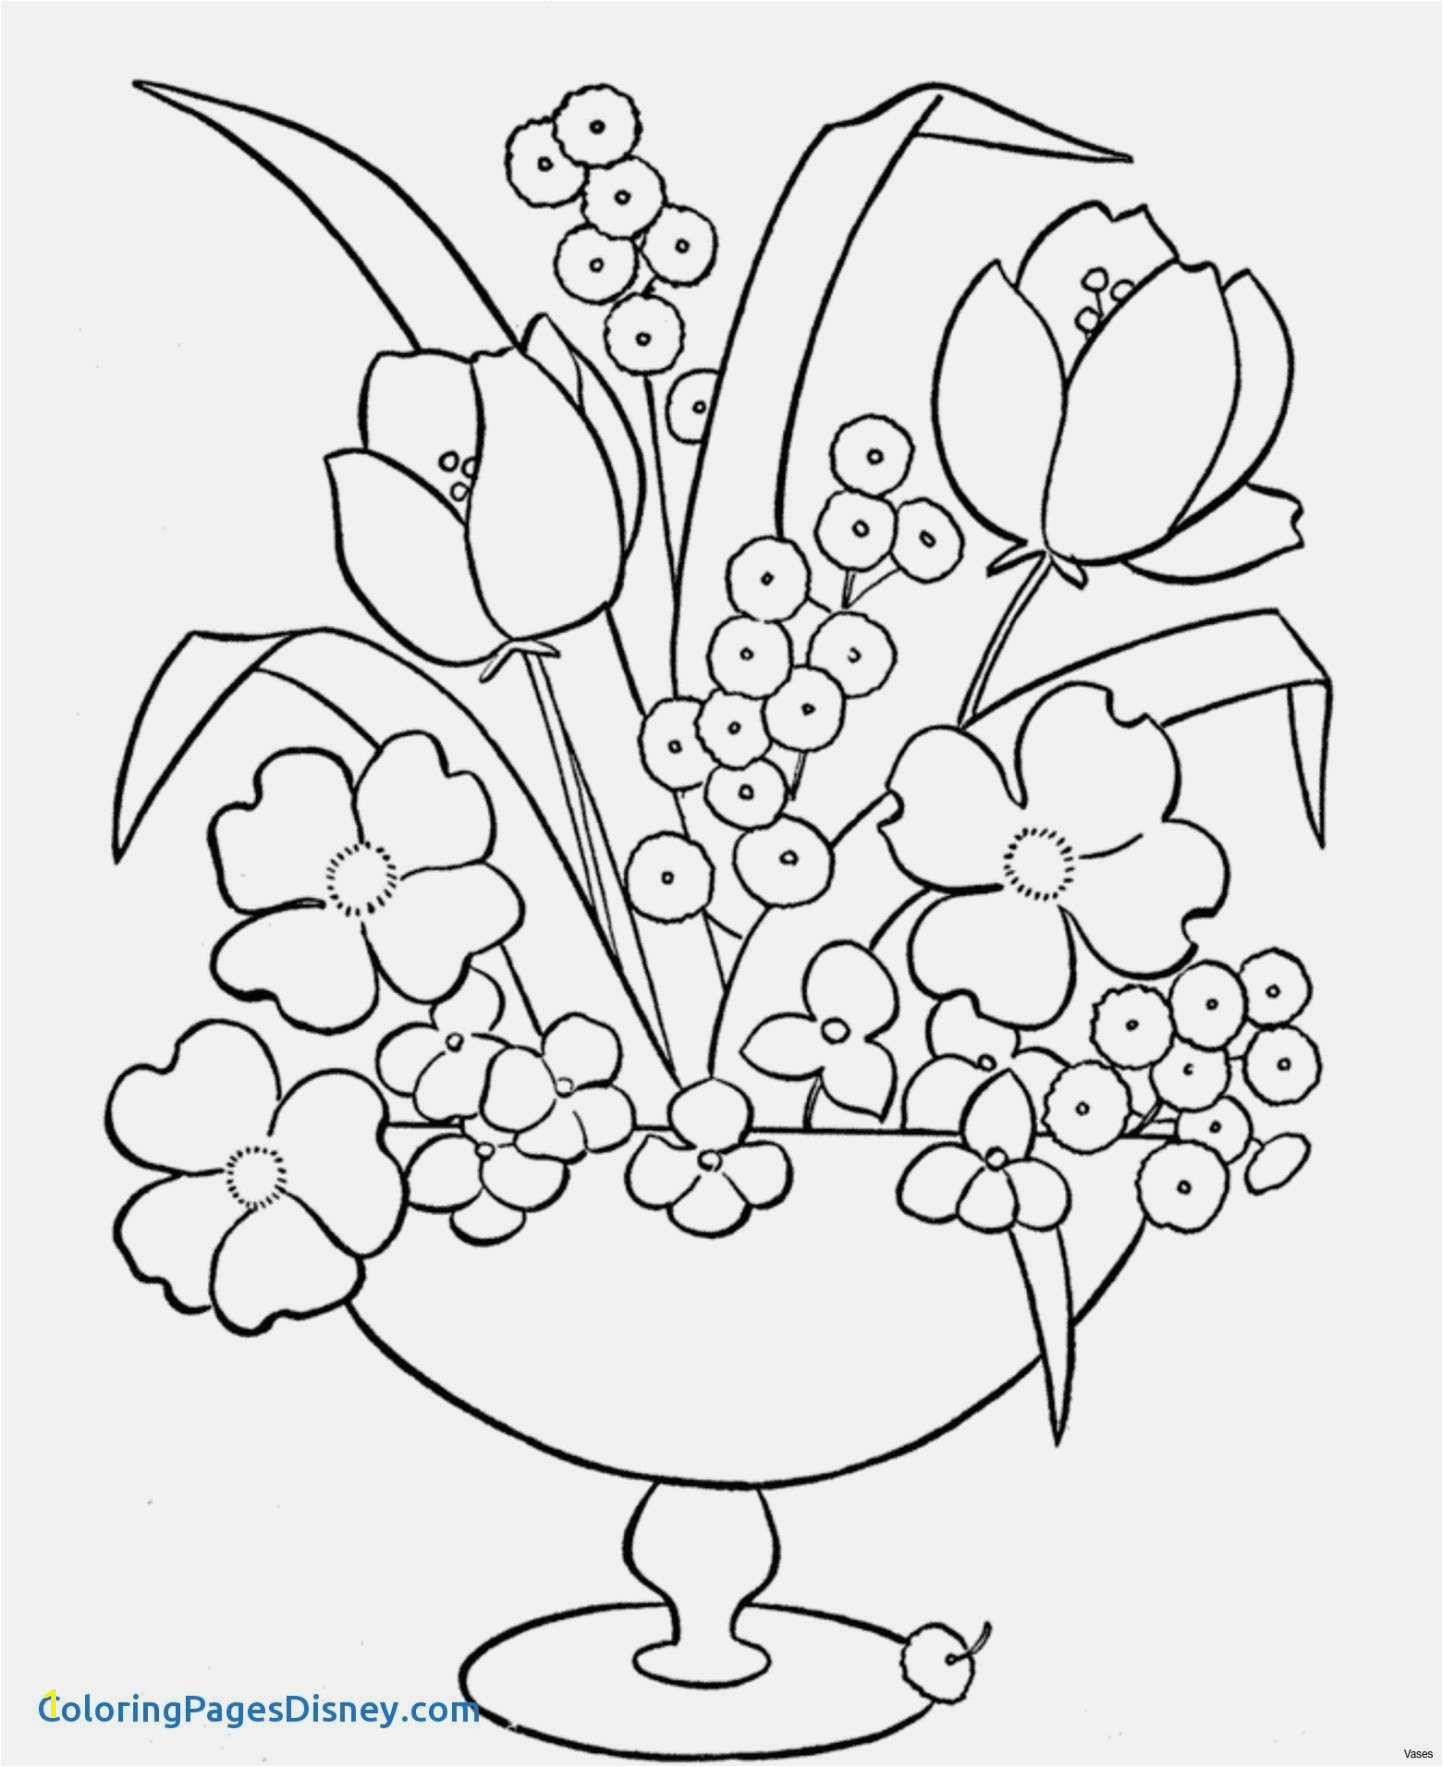 Free Fall Coloring Pages Best Ever Adult Coloring Pages Fall Cool Gallery Adult Coloring Page Fall